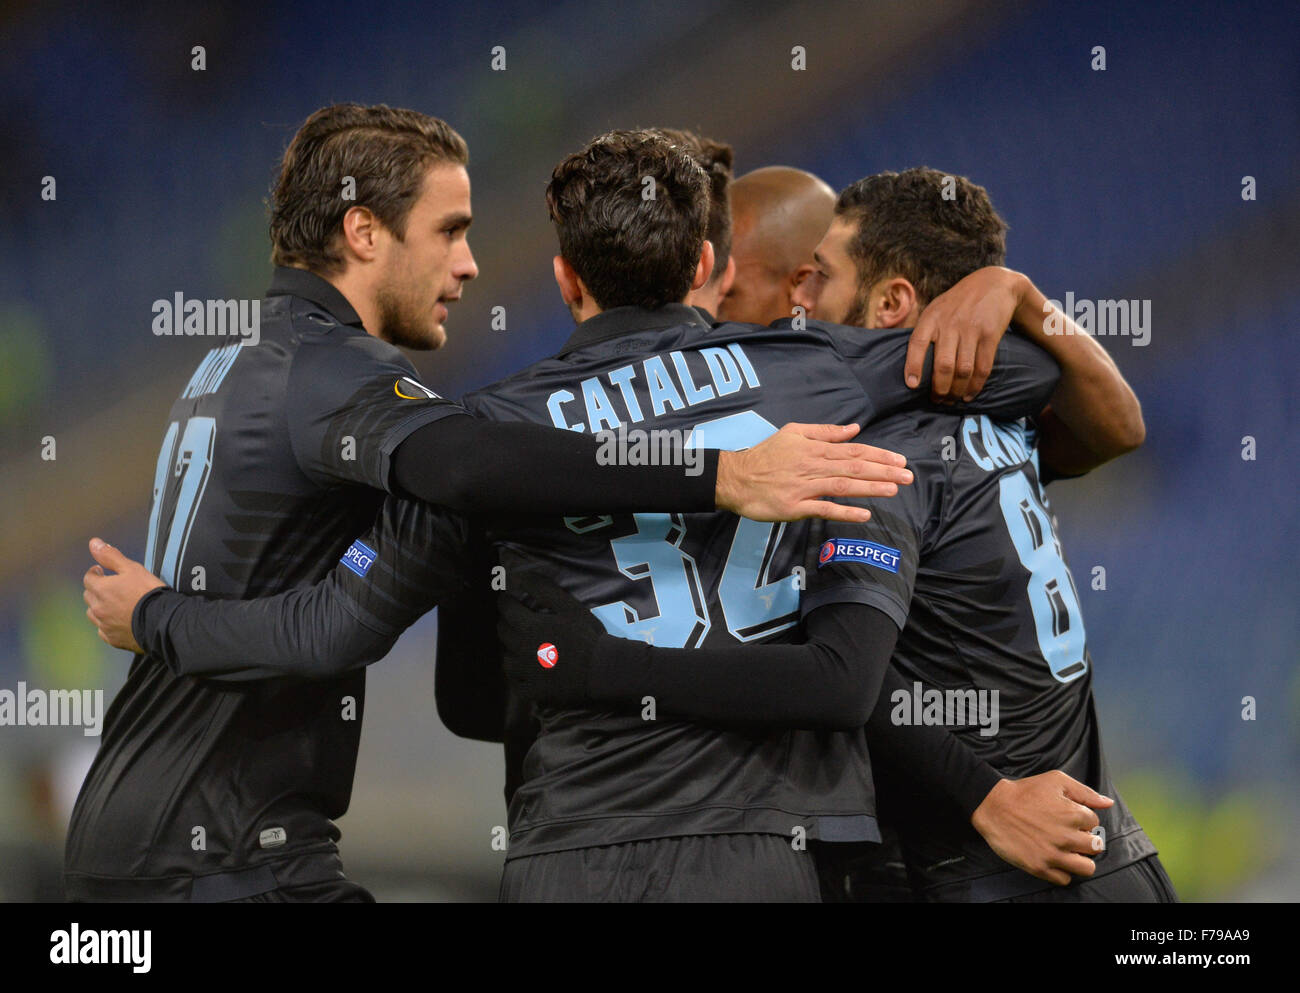 Rome, Italy. 26th November, 2015. Antonio Candreva celebrates after scoring goal 1-0 during the Europe League football match S.S. Lazio vs F.C. Dnipro at the Olympic Stadium in Rome, on november 26, 2015 Credit:  Silvia Lore'/Alamy Live News Stock Photo